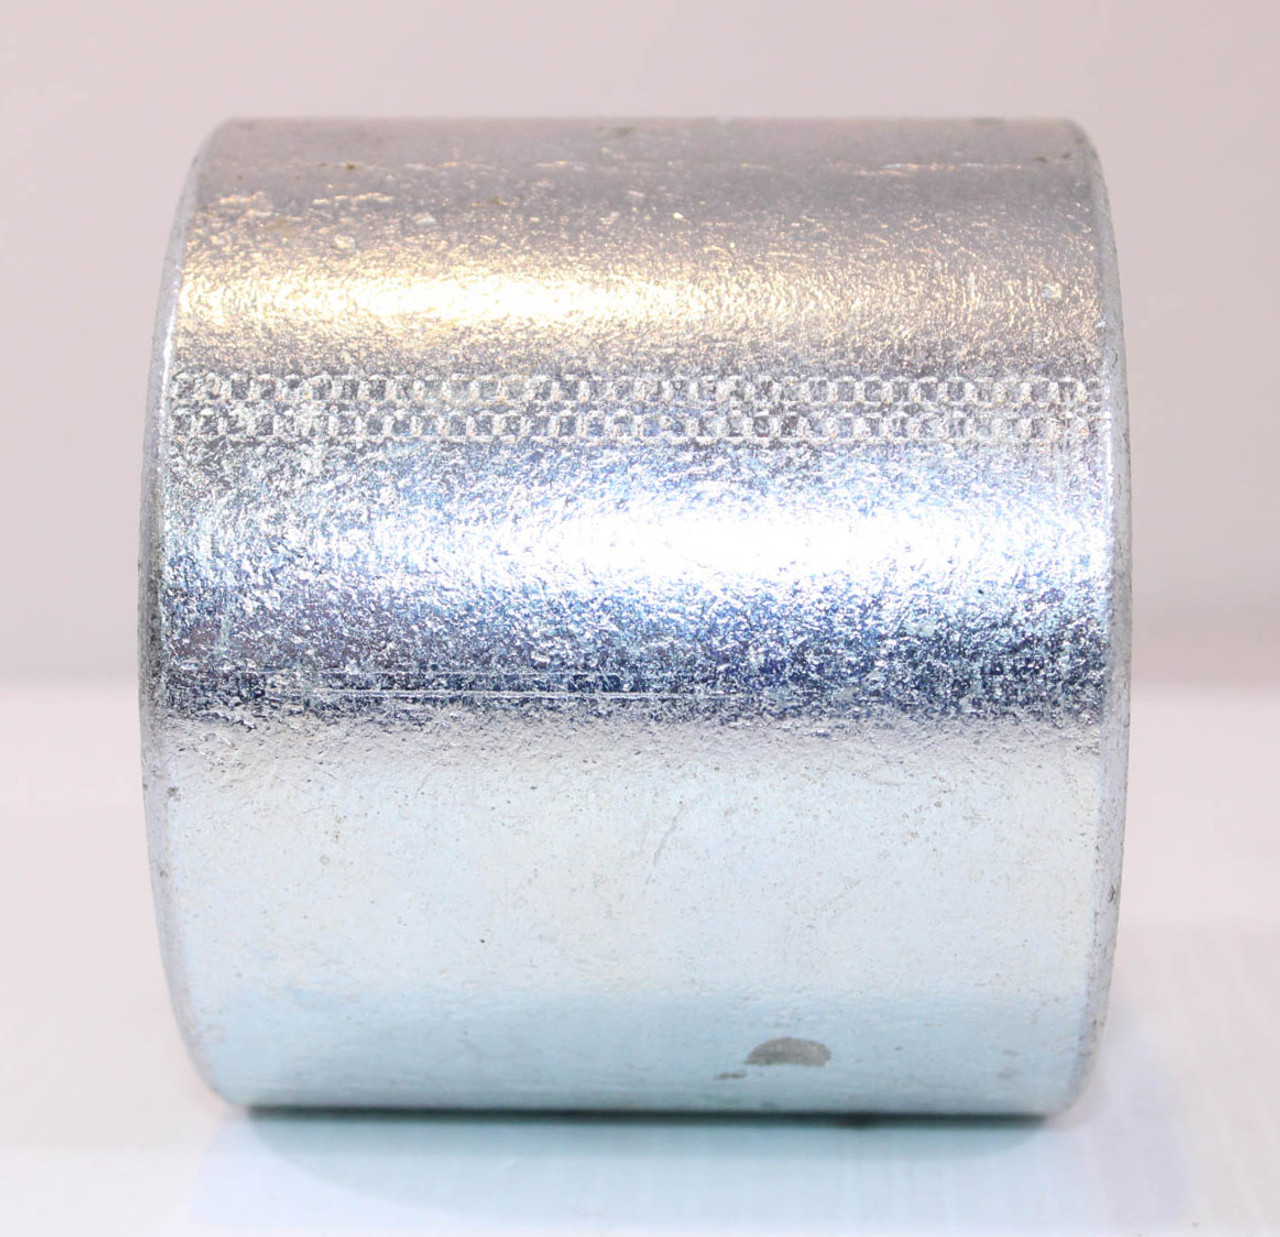 Garvin RC-300 Conduit Threaded Galvanized Steel Coupling Size 3 Inches.